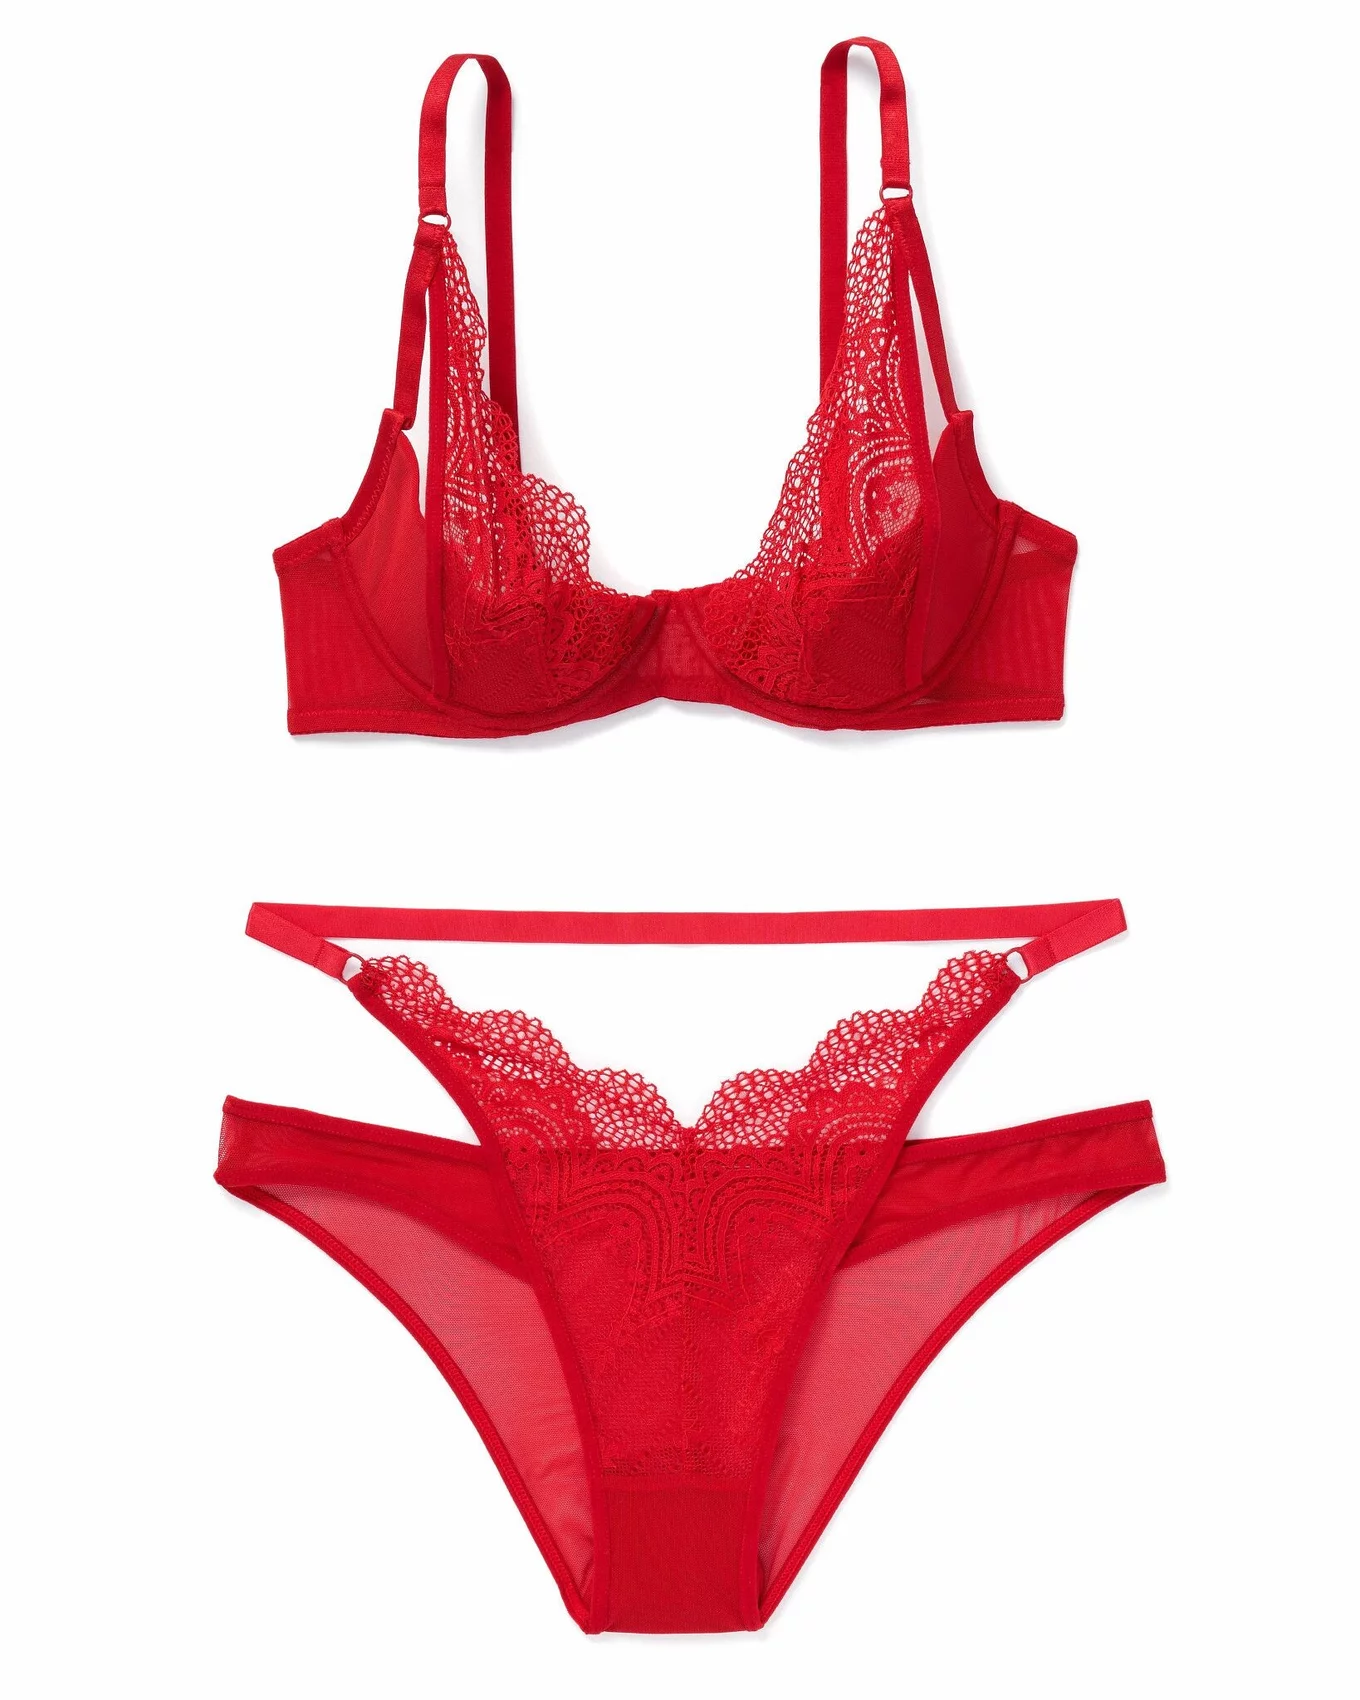 Adore Me - Gynger Unlined  Bra and panty sets, Sassy red lipstick